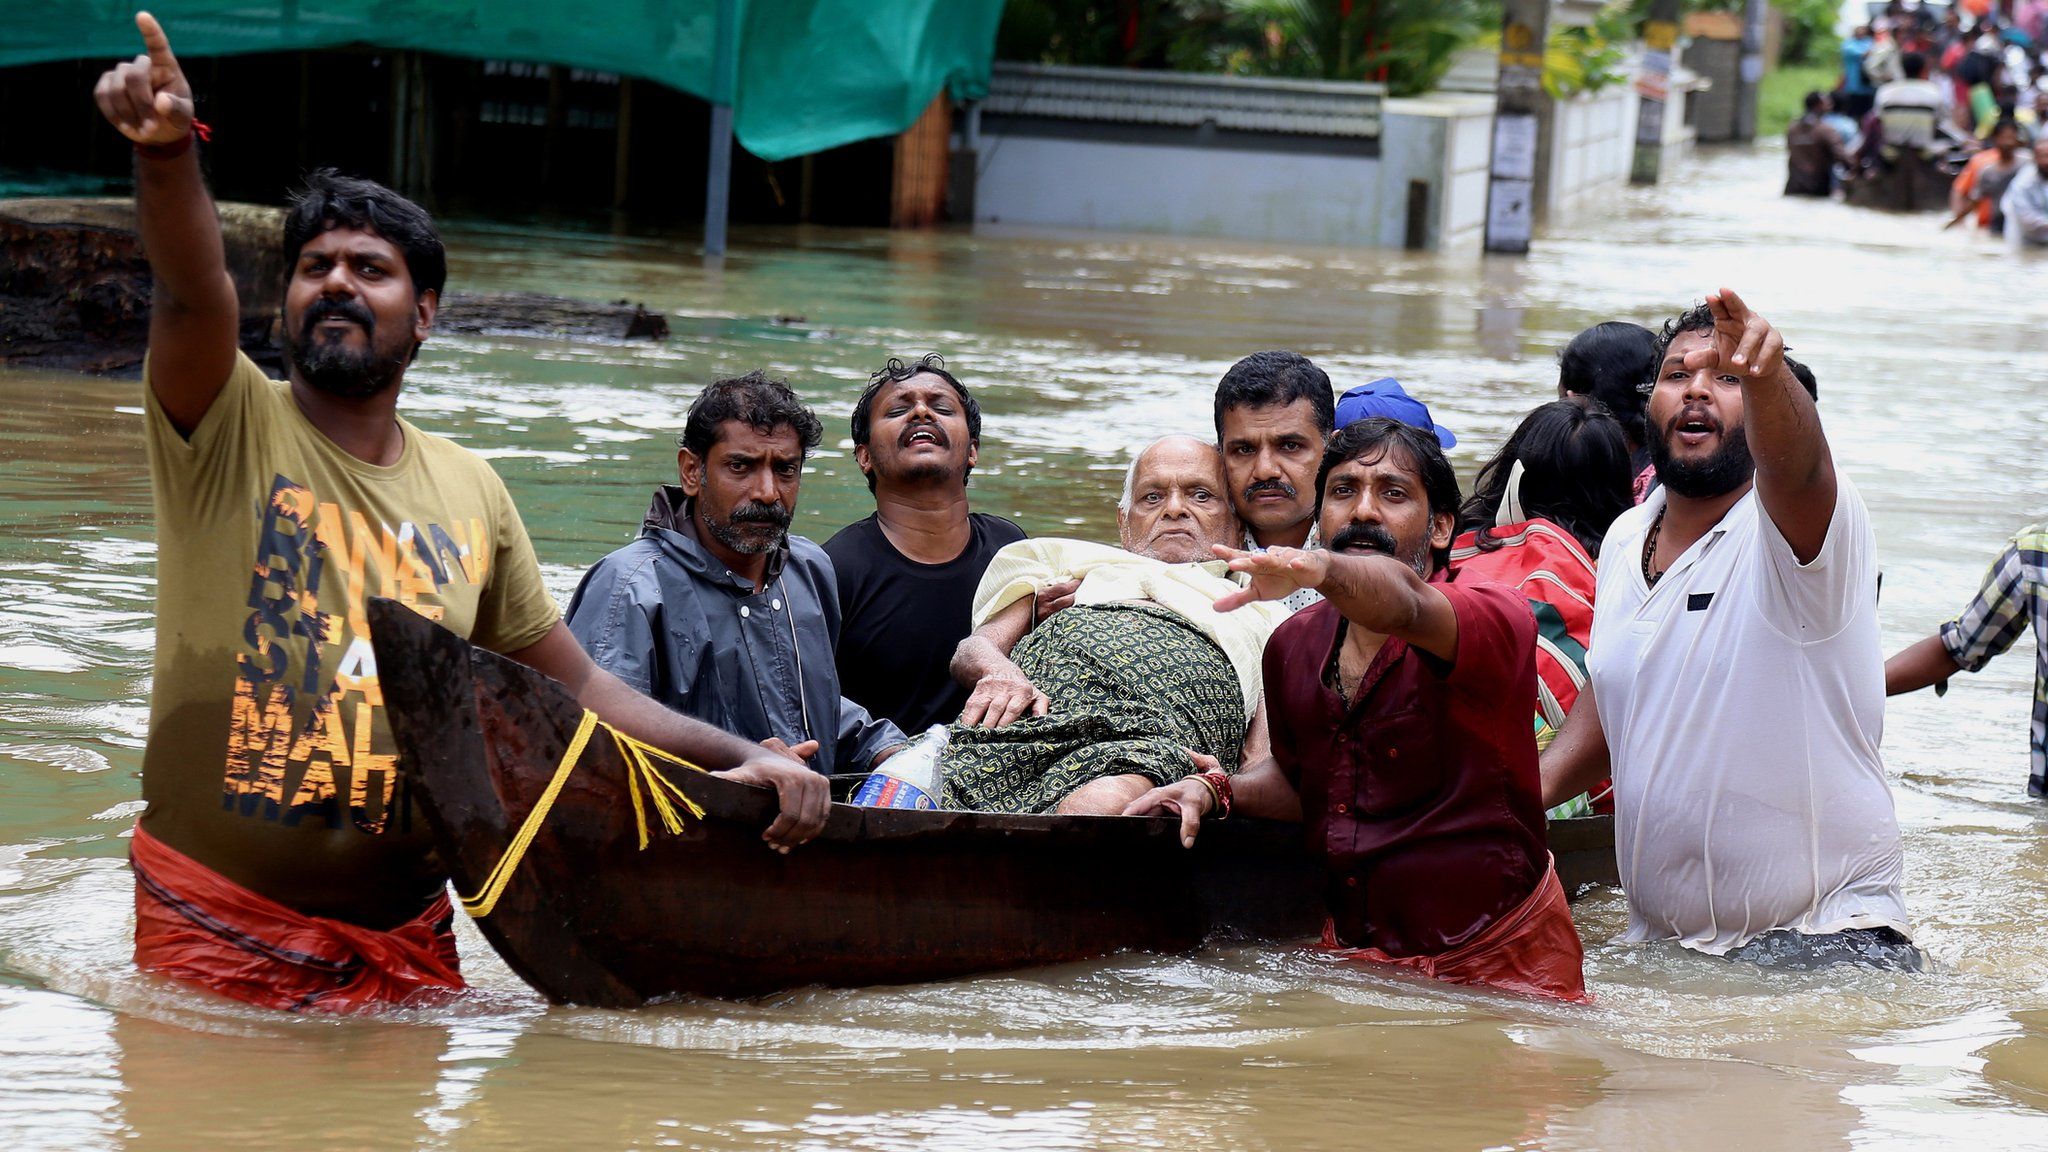 Indian people use a boat to rescue an elderly man in the flooded water in Kochi, Kerala state, India, 17 August 2018